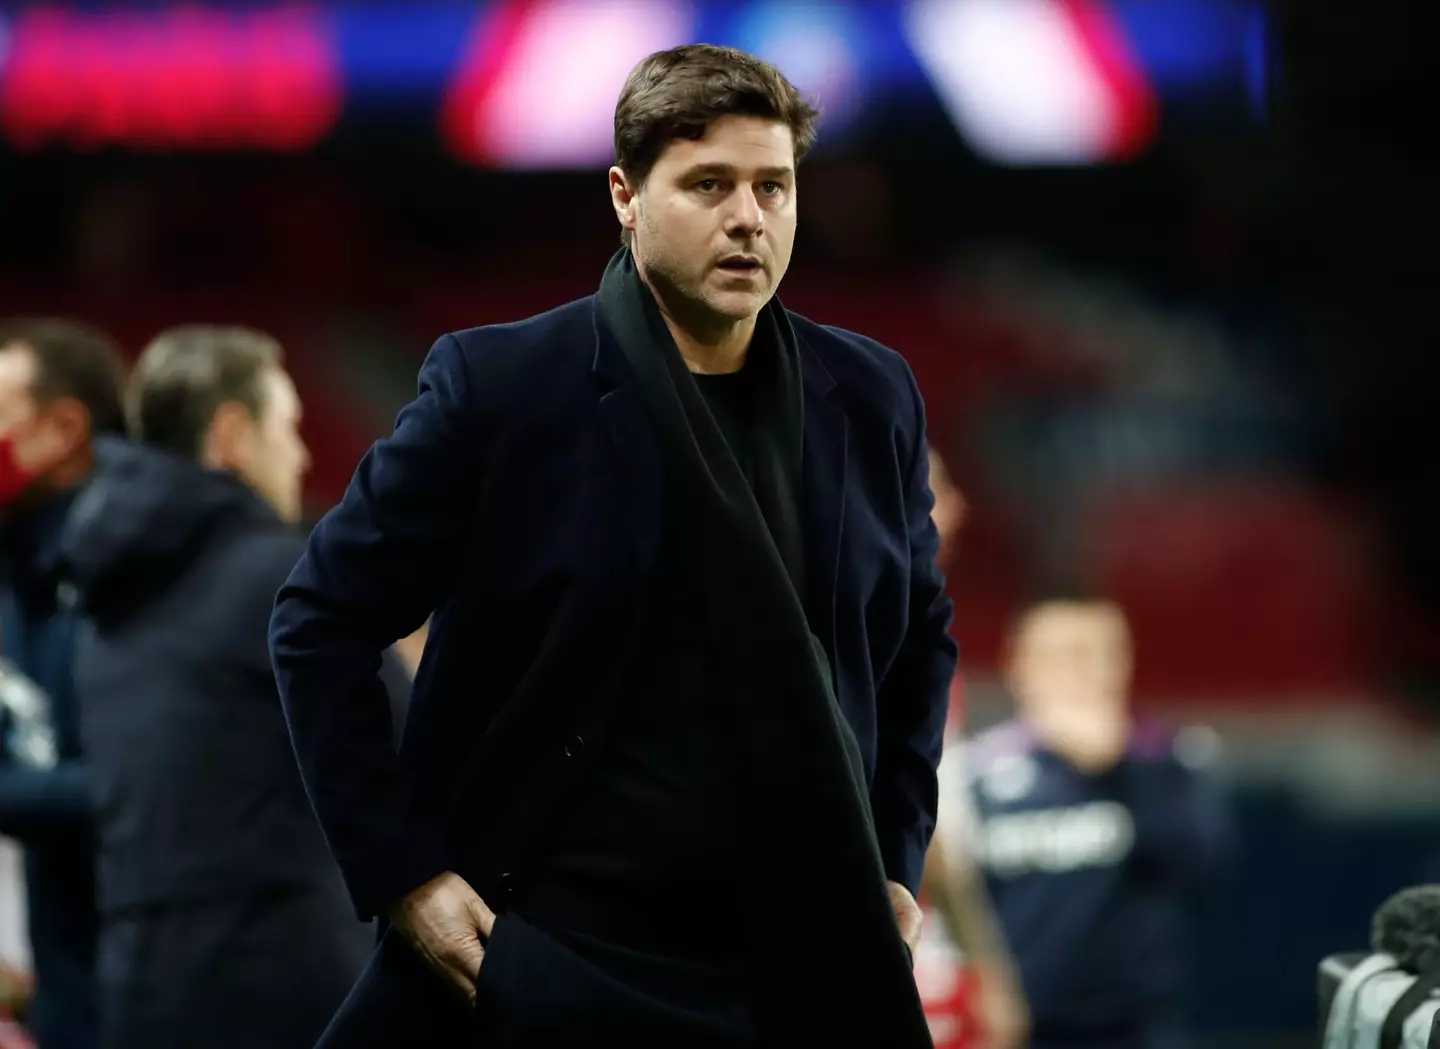 PSG head coach Mauricio Pochettino has been consistently linked with United (Image: Alamy)